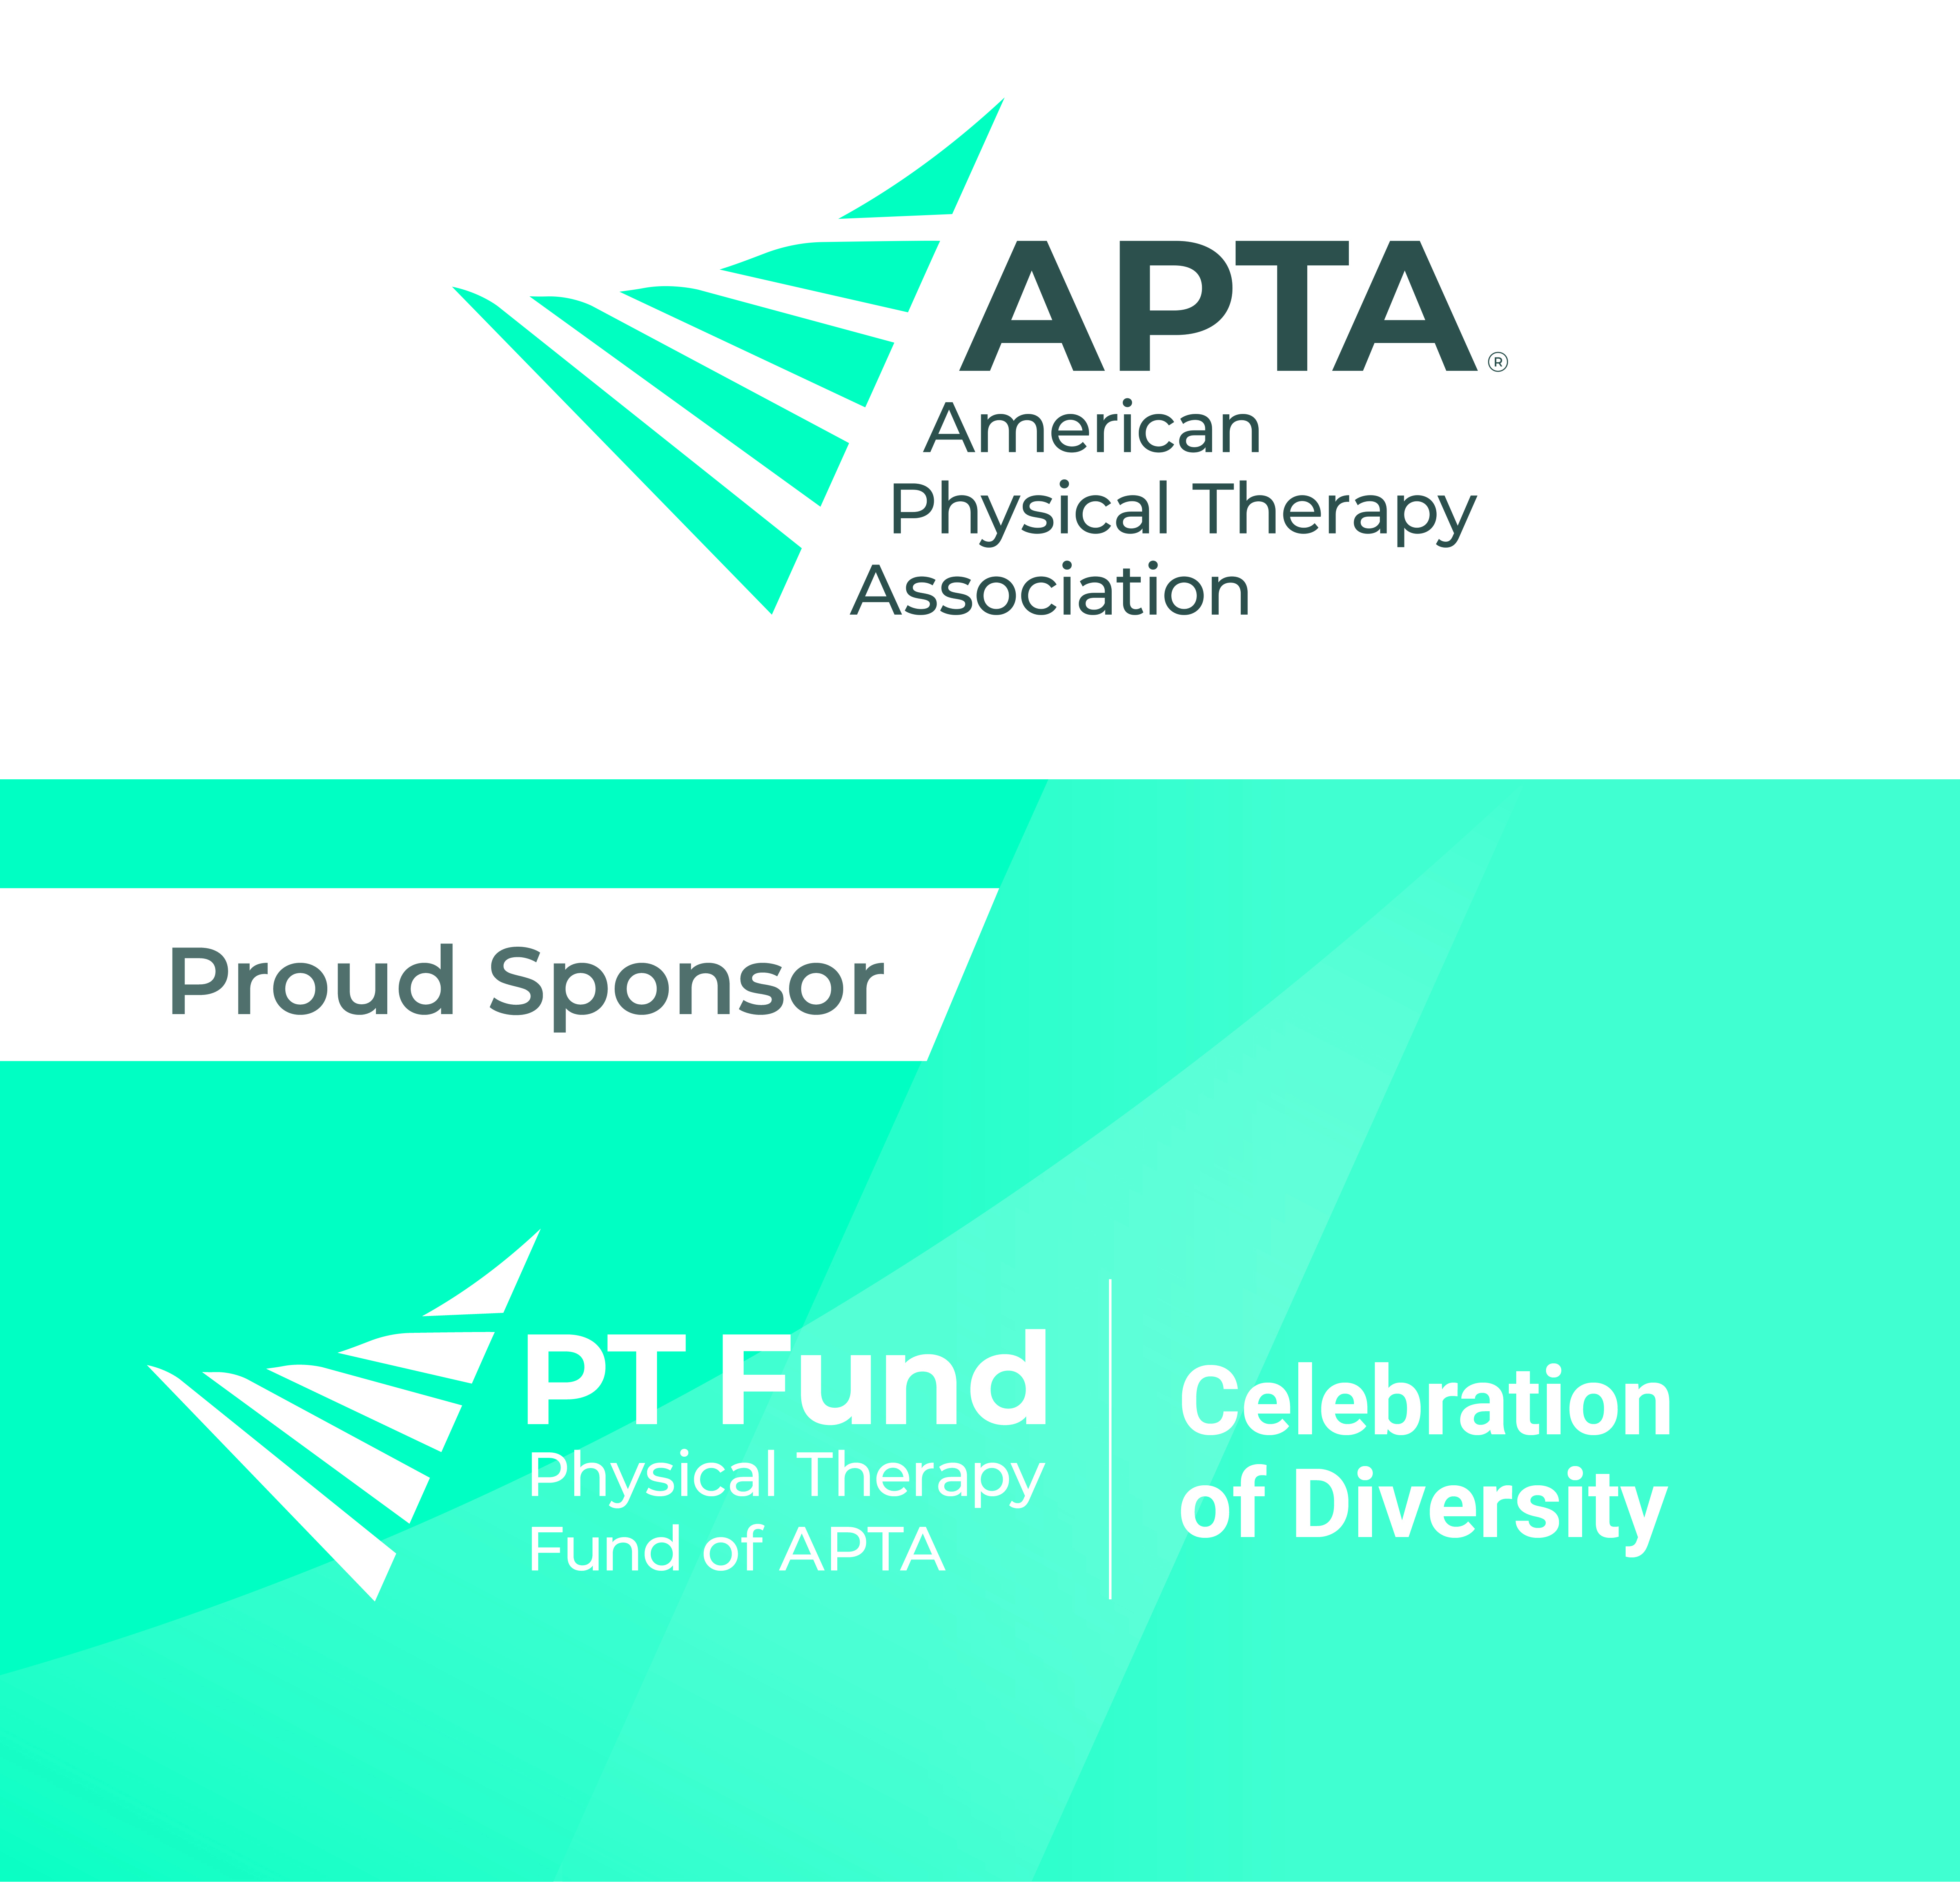 HPSO is a proud partner of the American Physical Therapy Association